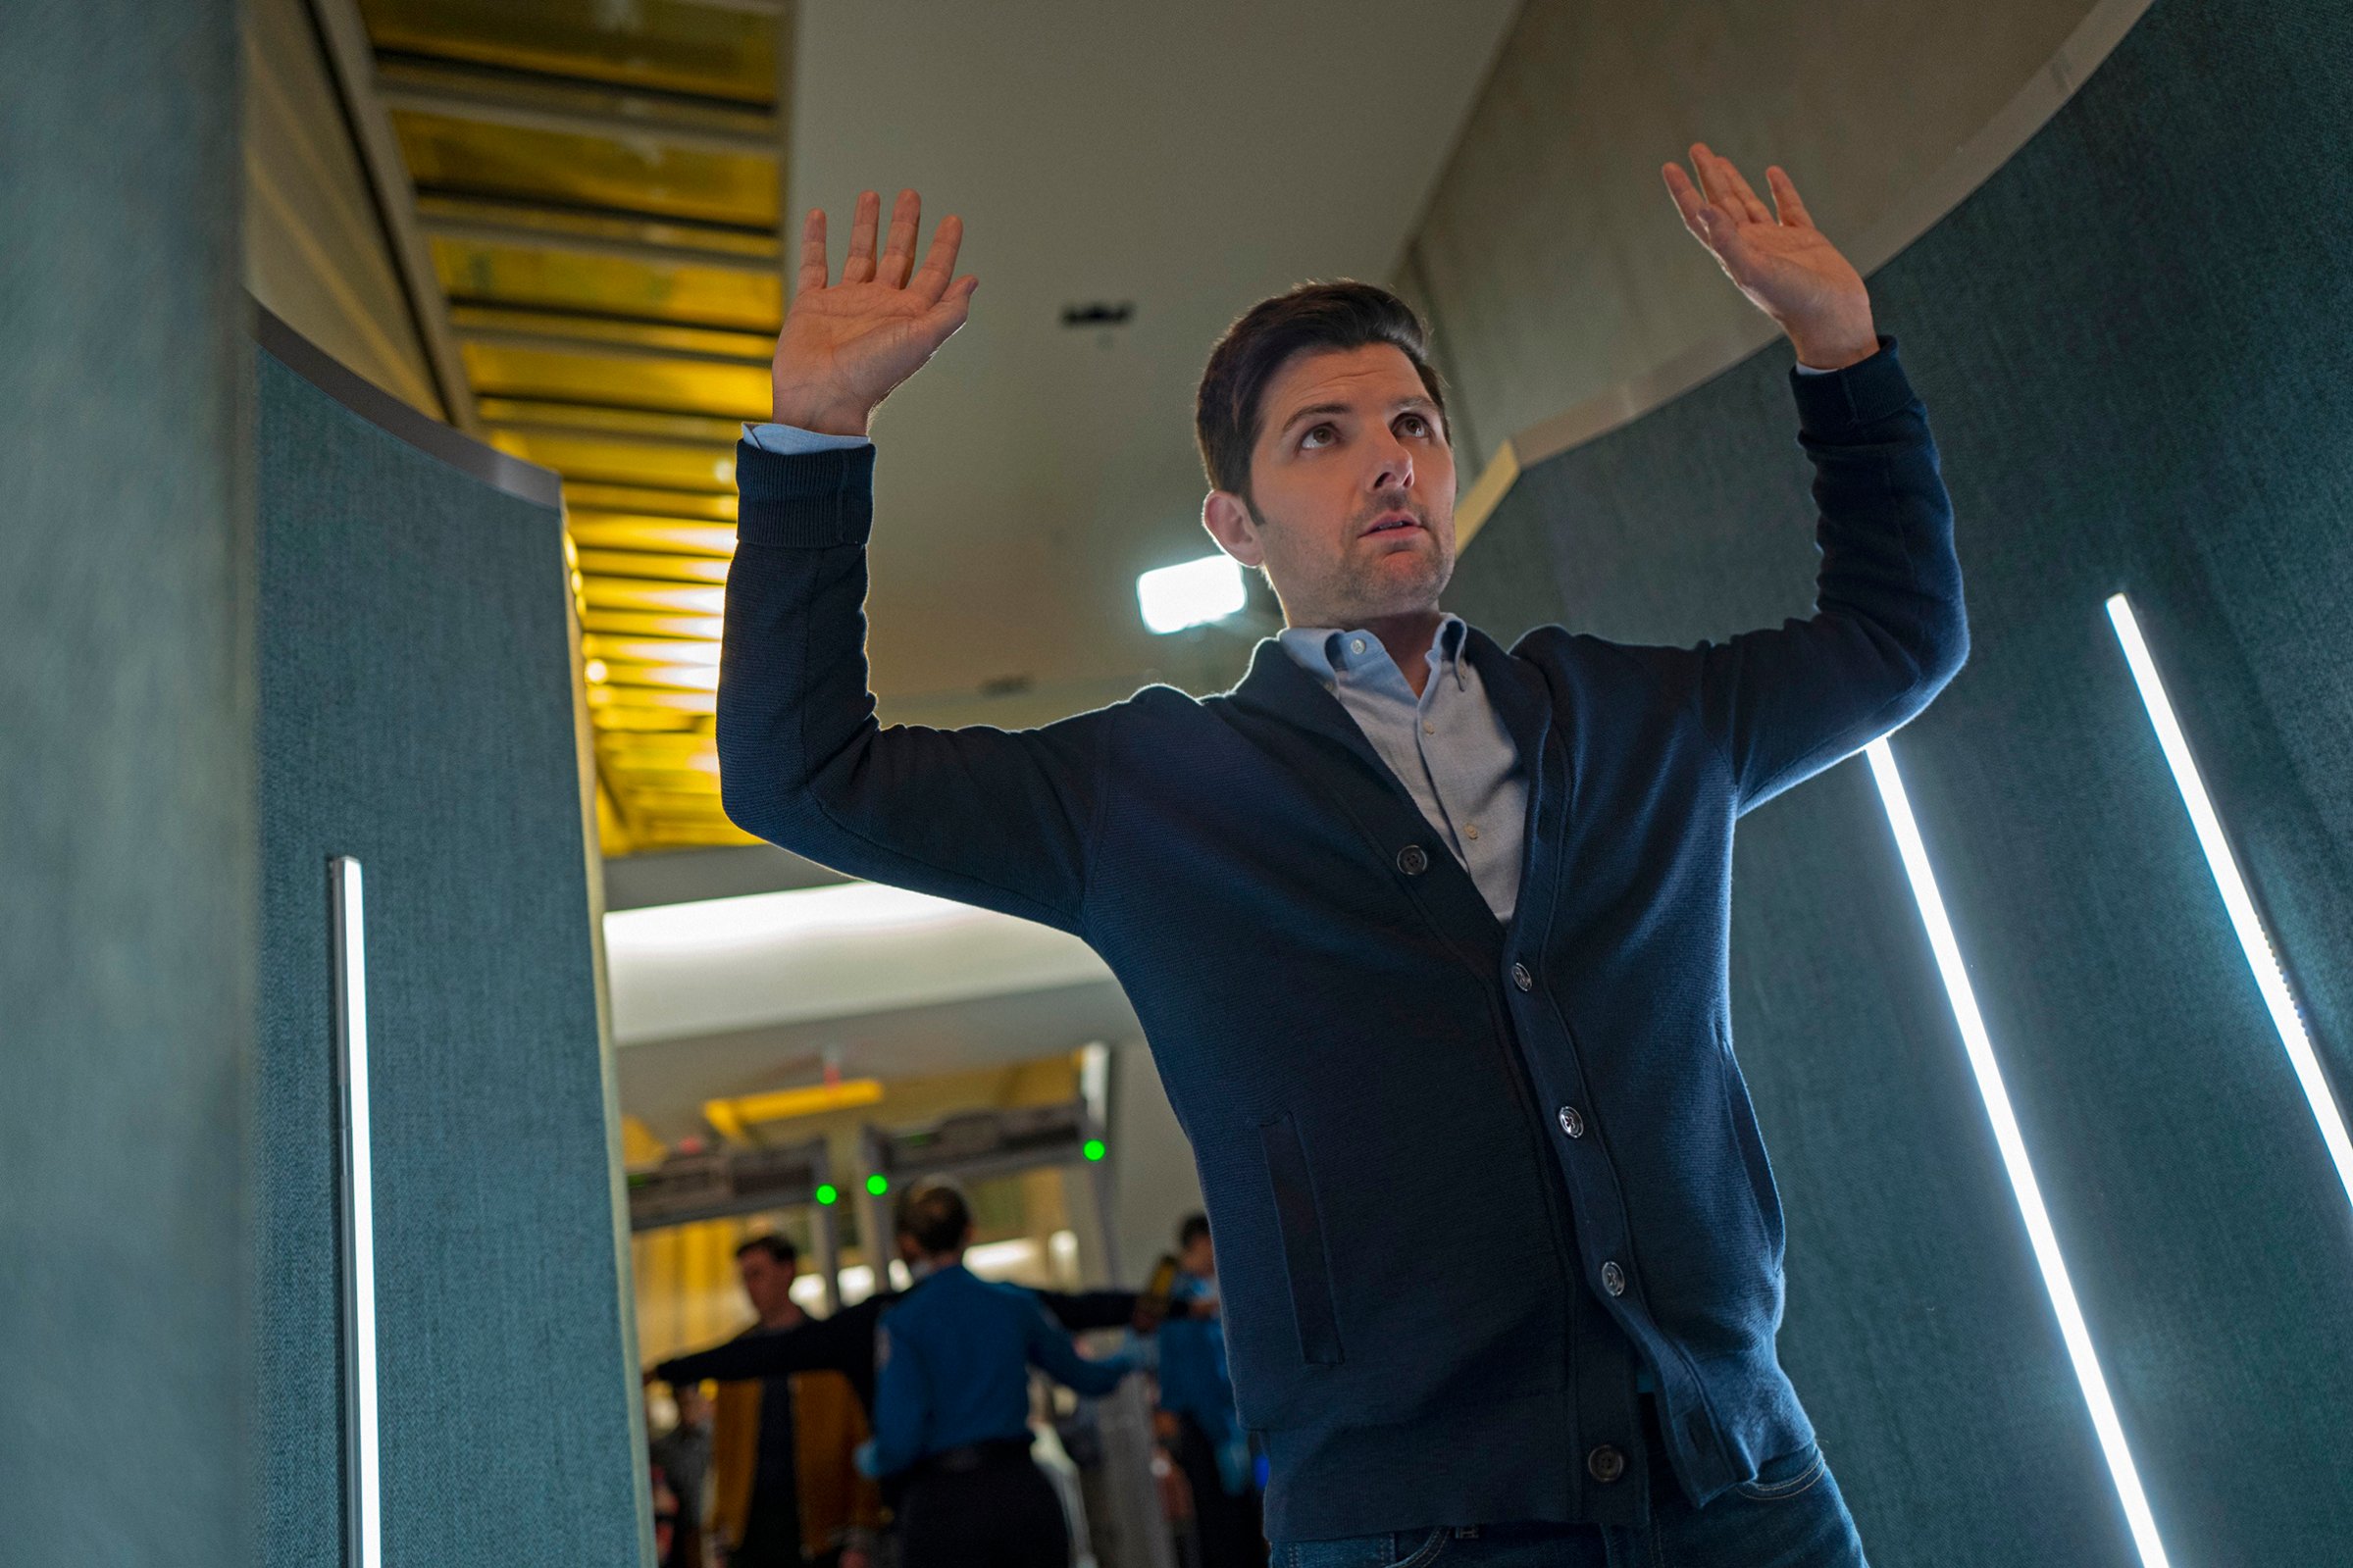 Adam Scott’s journalist struggles to discern what’s real and what’s not